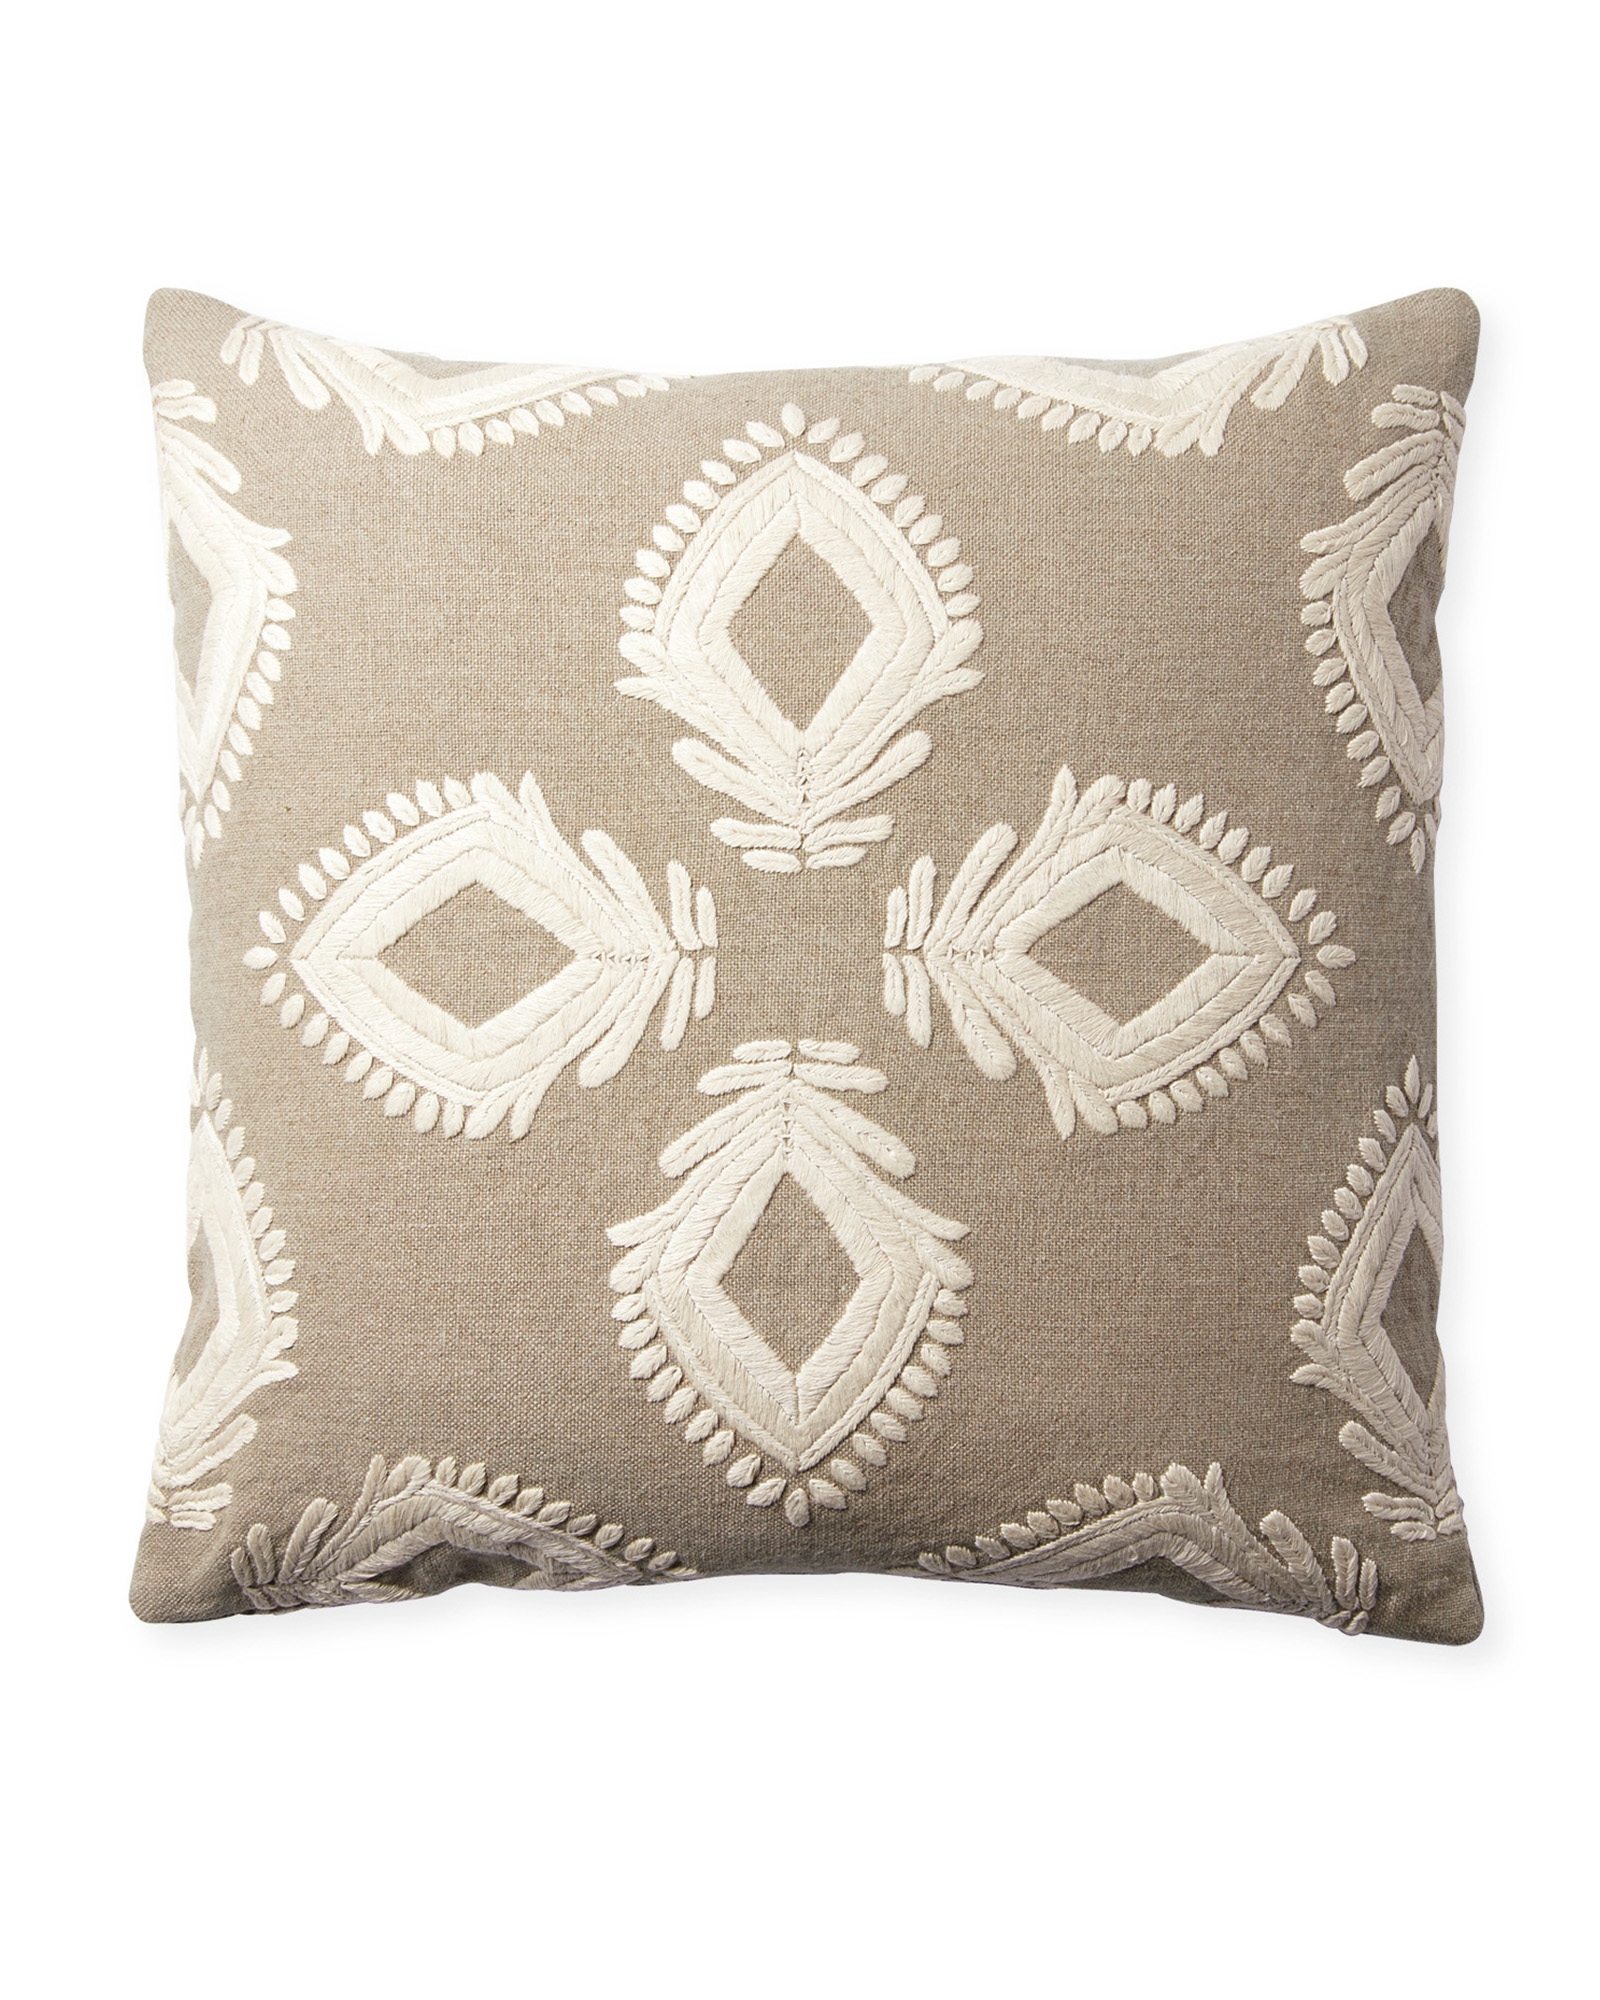 Leighton 24" SQ Pillow Cover - Flax - Insert sold separately - Image 0